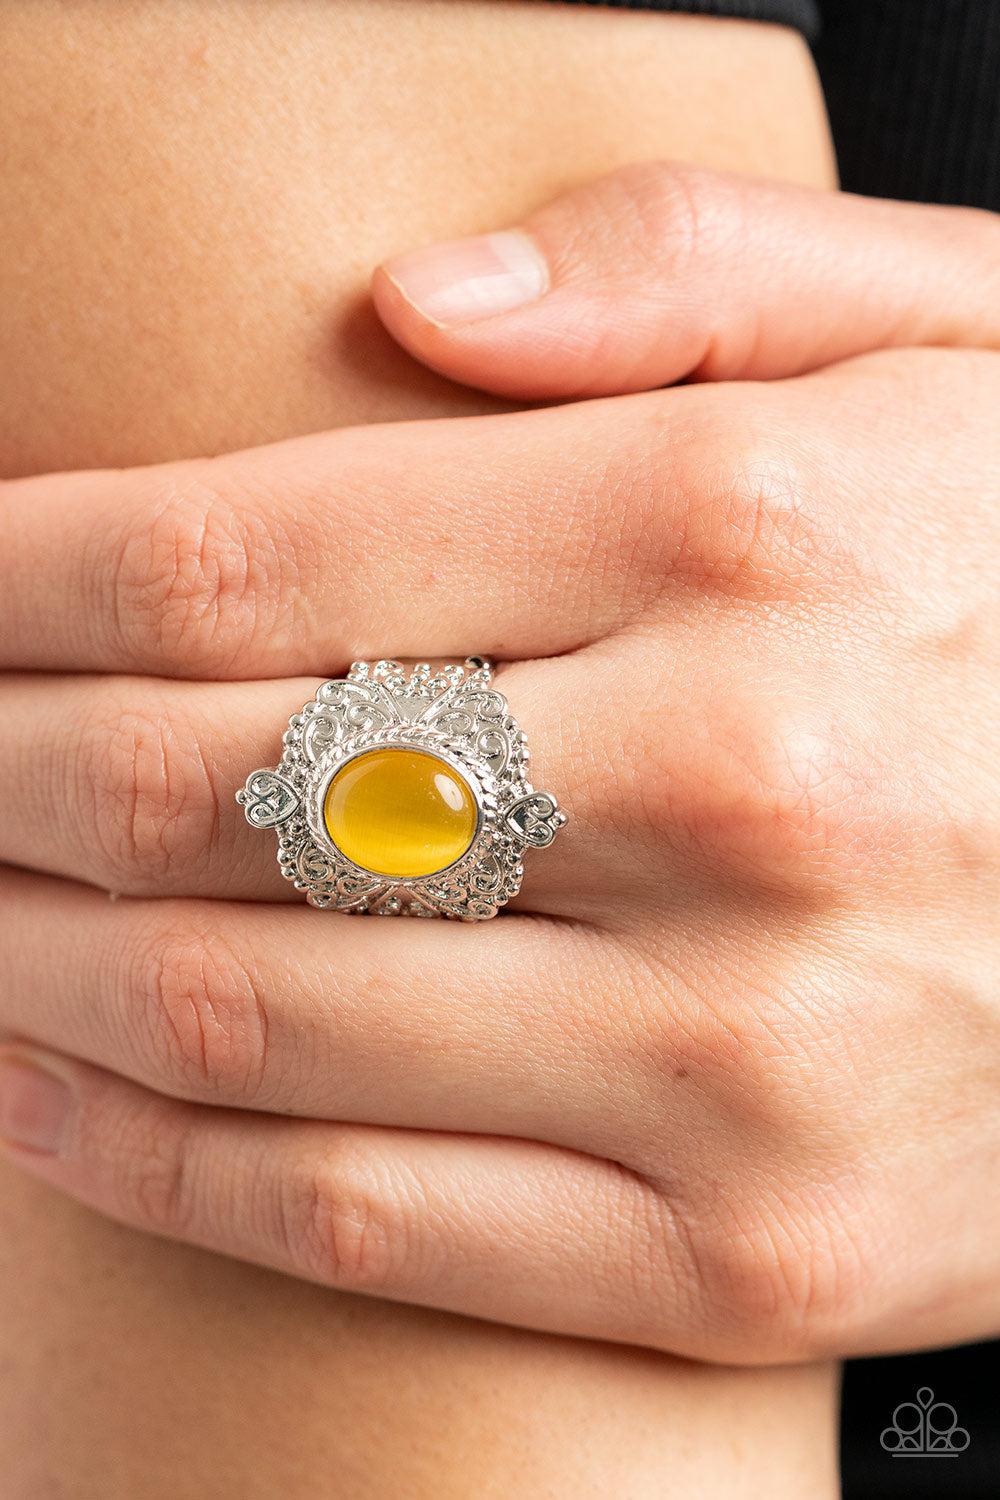 Delightfully Dreamy Yellow Cat's Eye Stone Ring - Paparazzi Accessories- lightbox - CarasShop.com - $5 Jewelry by Cara Jewels